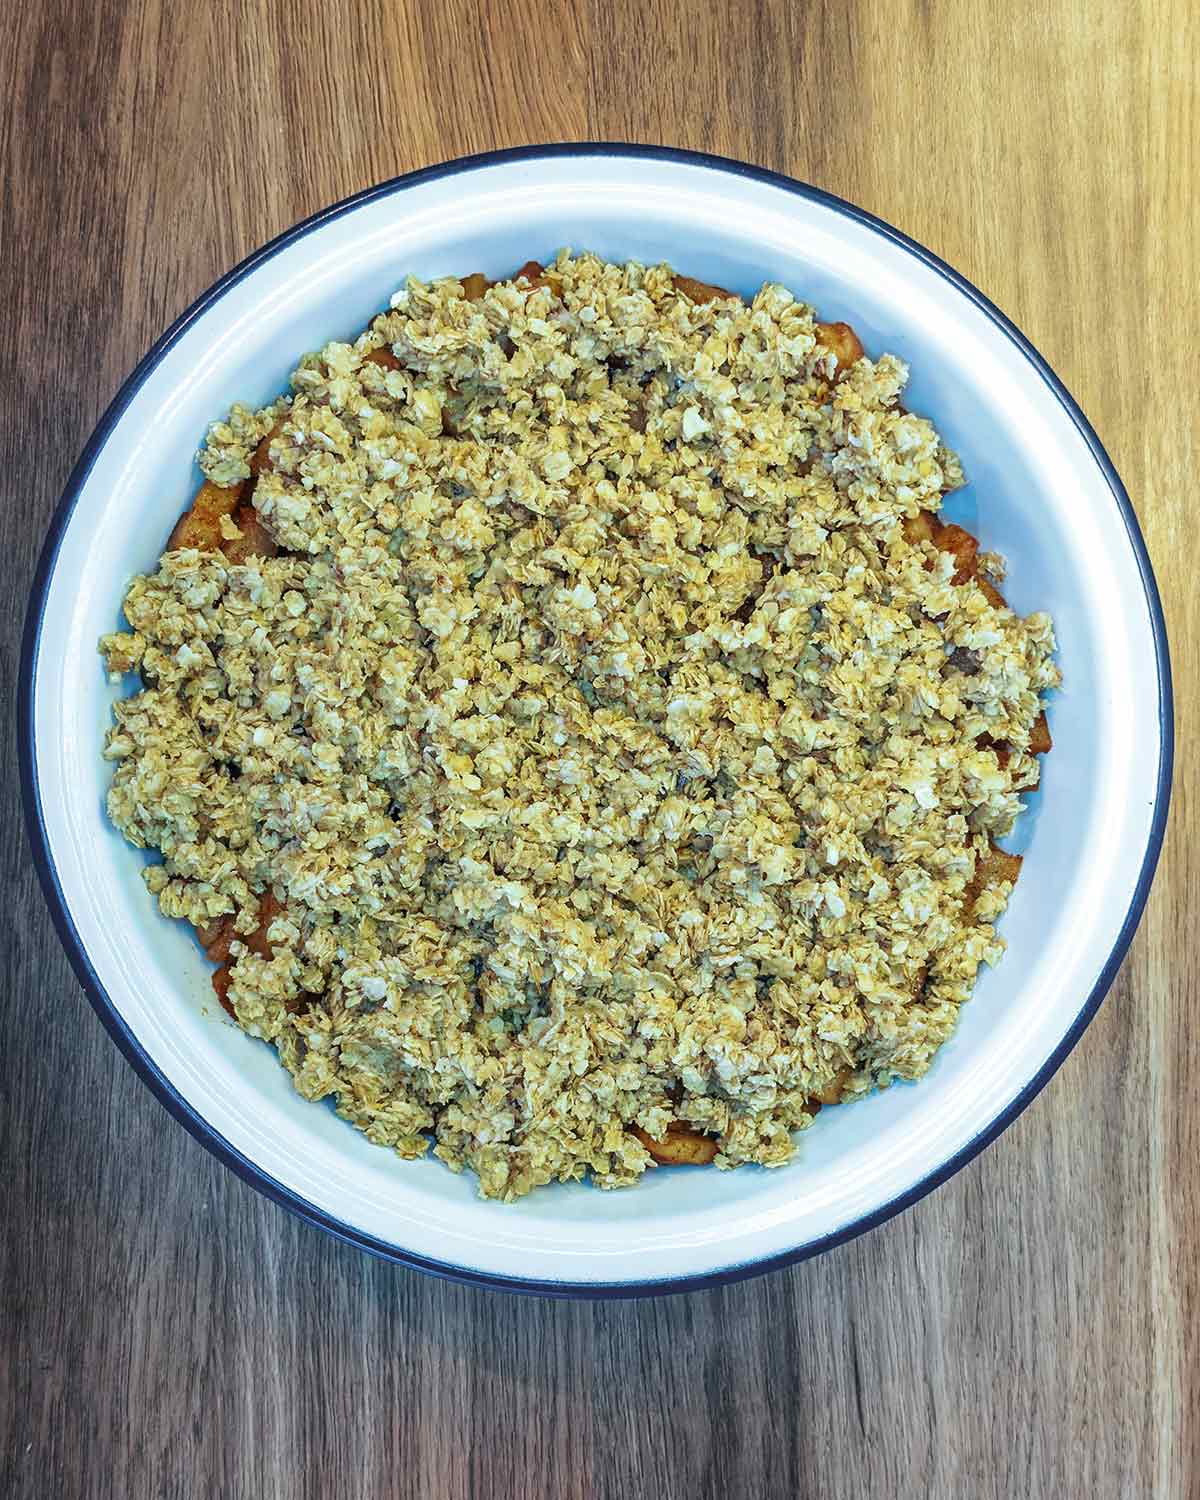 The cooked apples in a baking dish topped with the oat mixture.